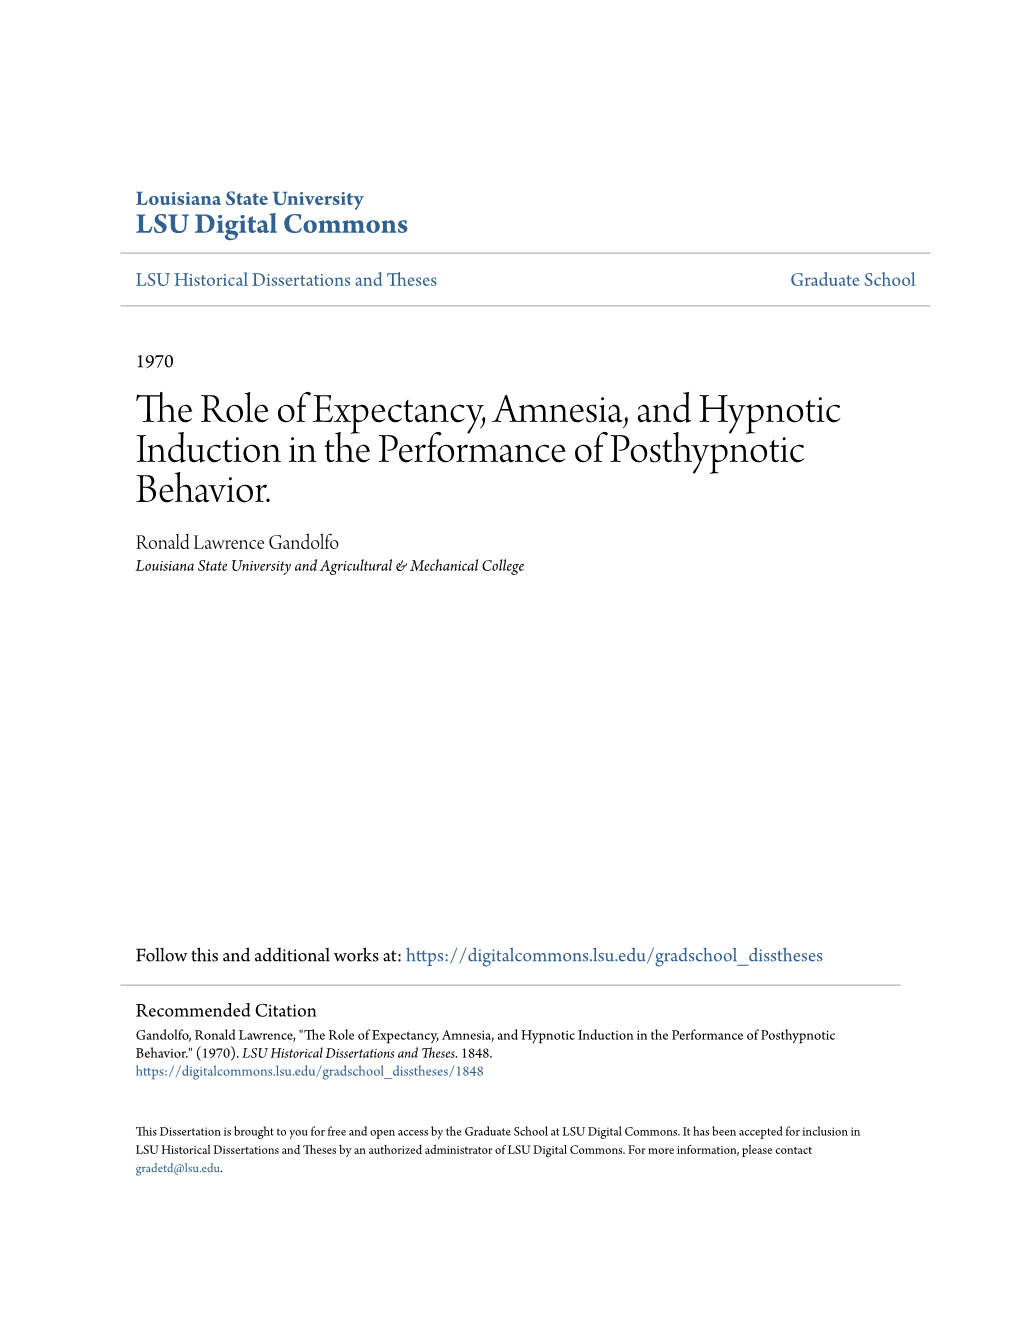 The Role of Expectancy, Amnesia, and Hypnotic Induction in the Performance of Posthypnotic Behavior